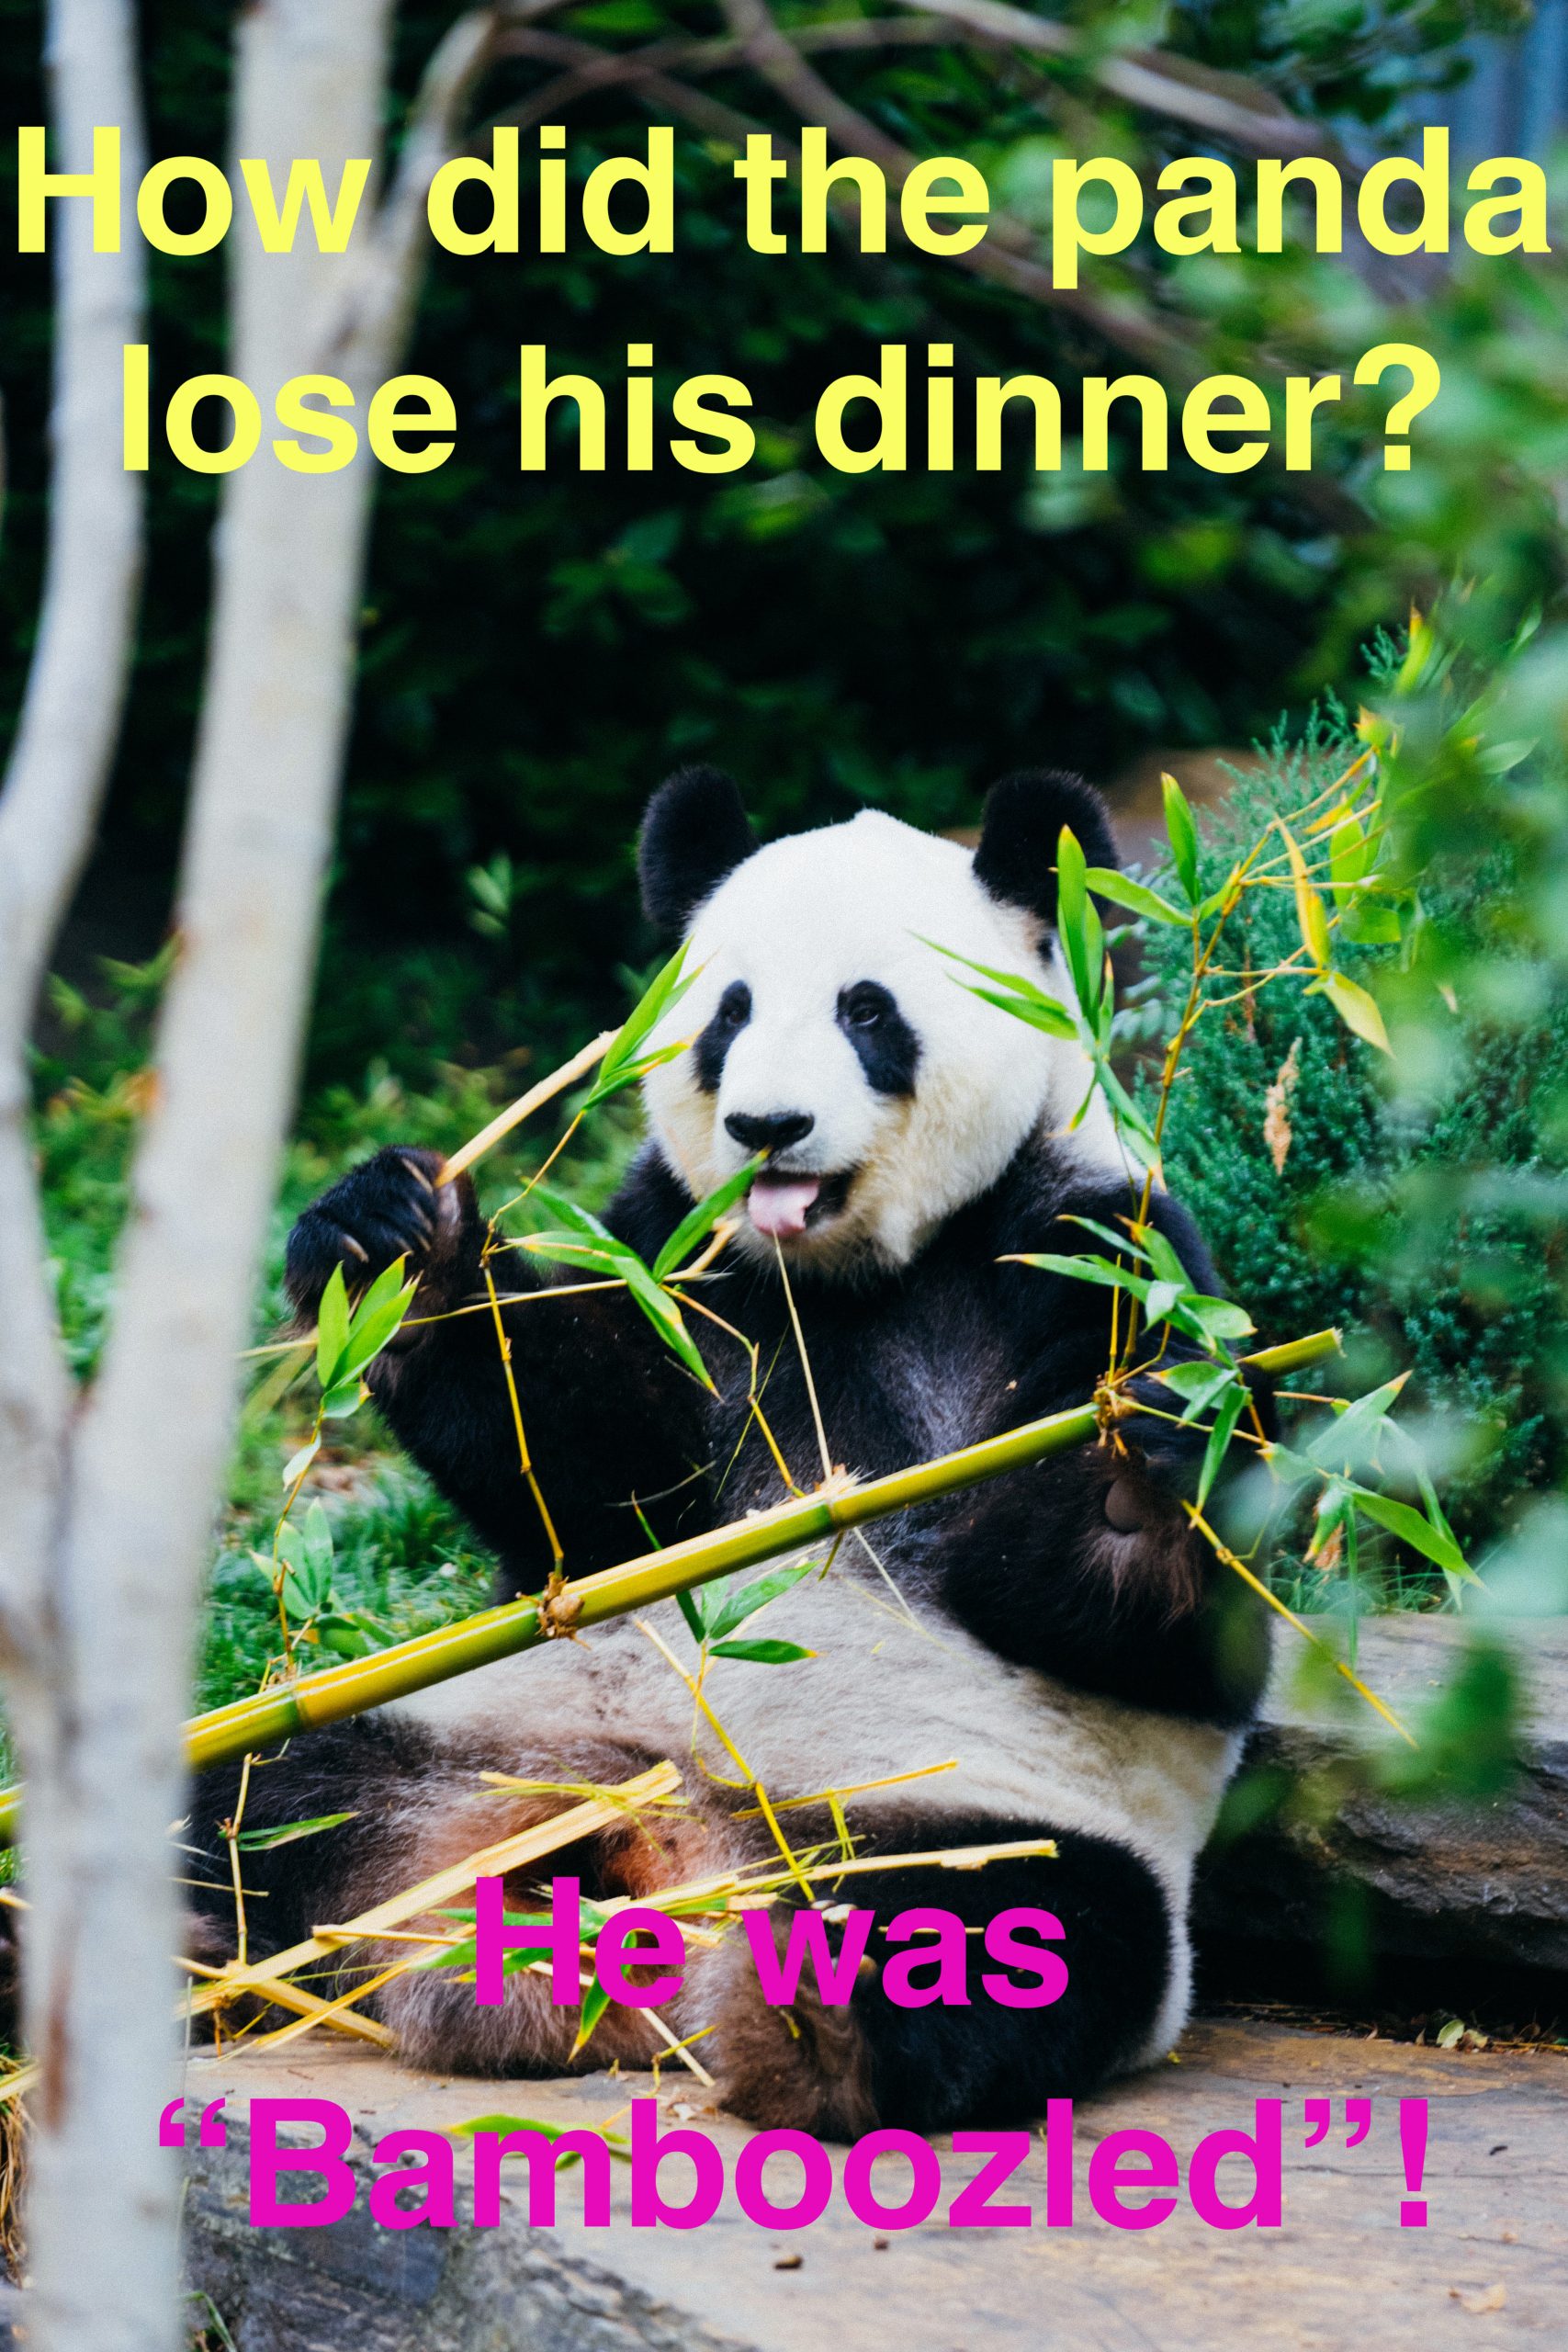 How did the panda lose his dinner? He was  “Bamboozled”!